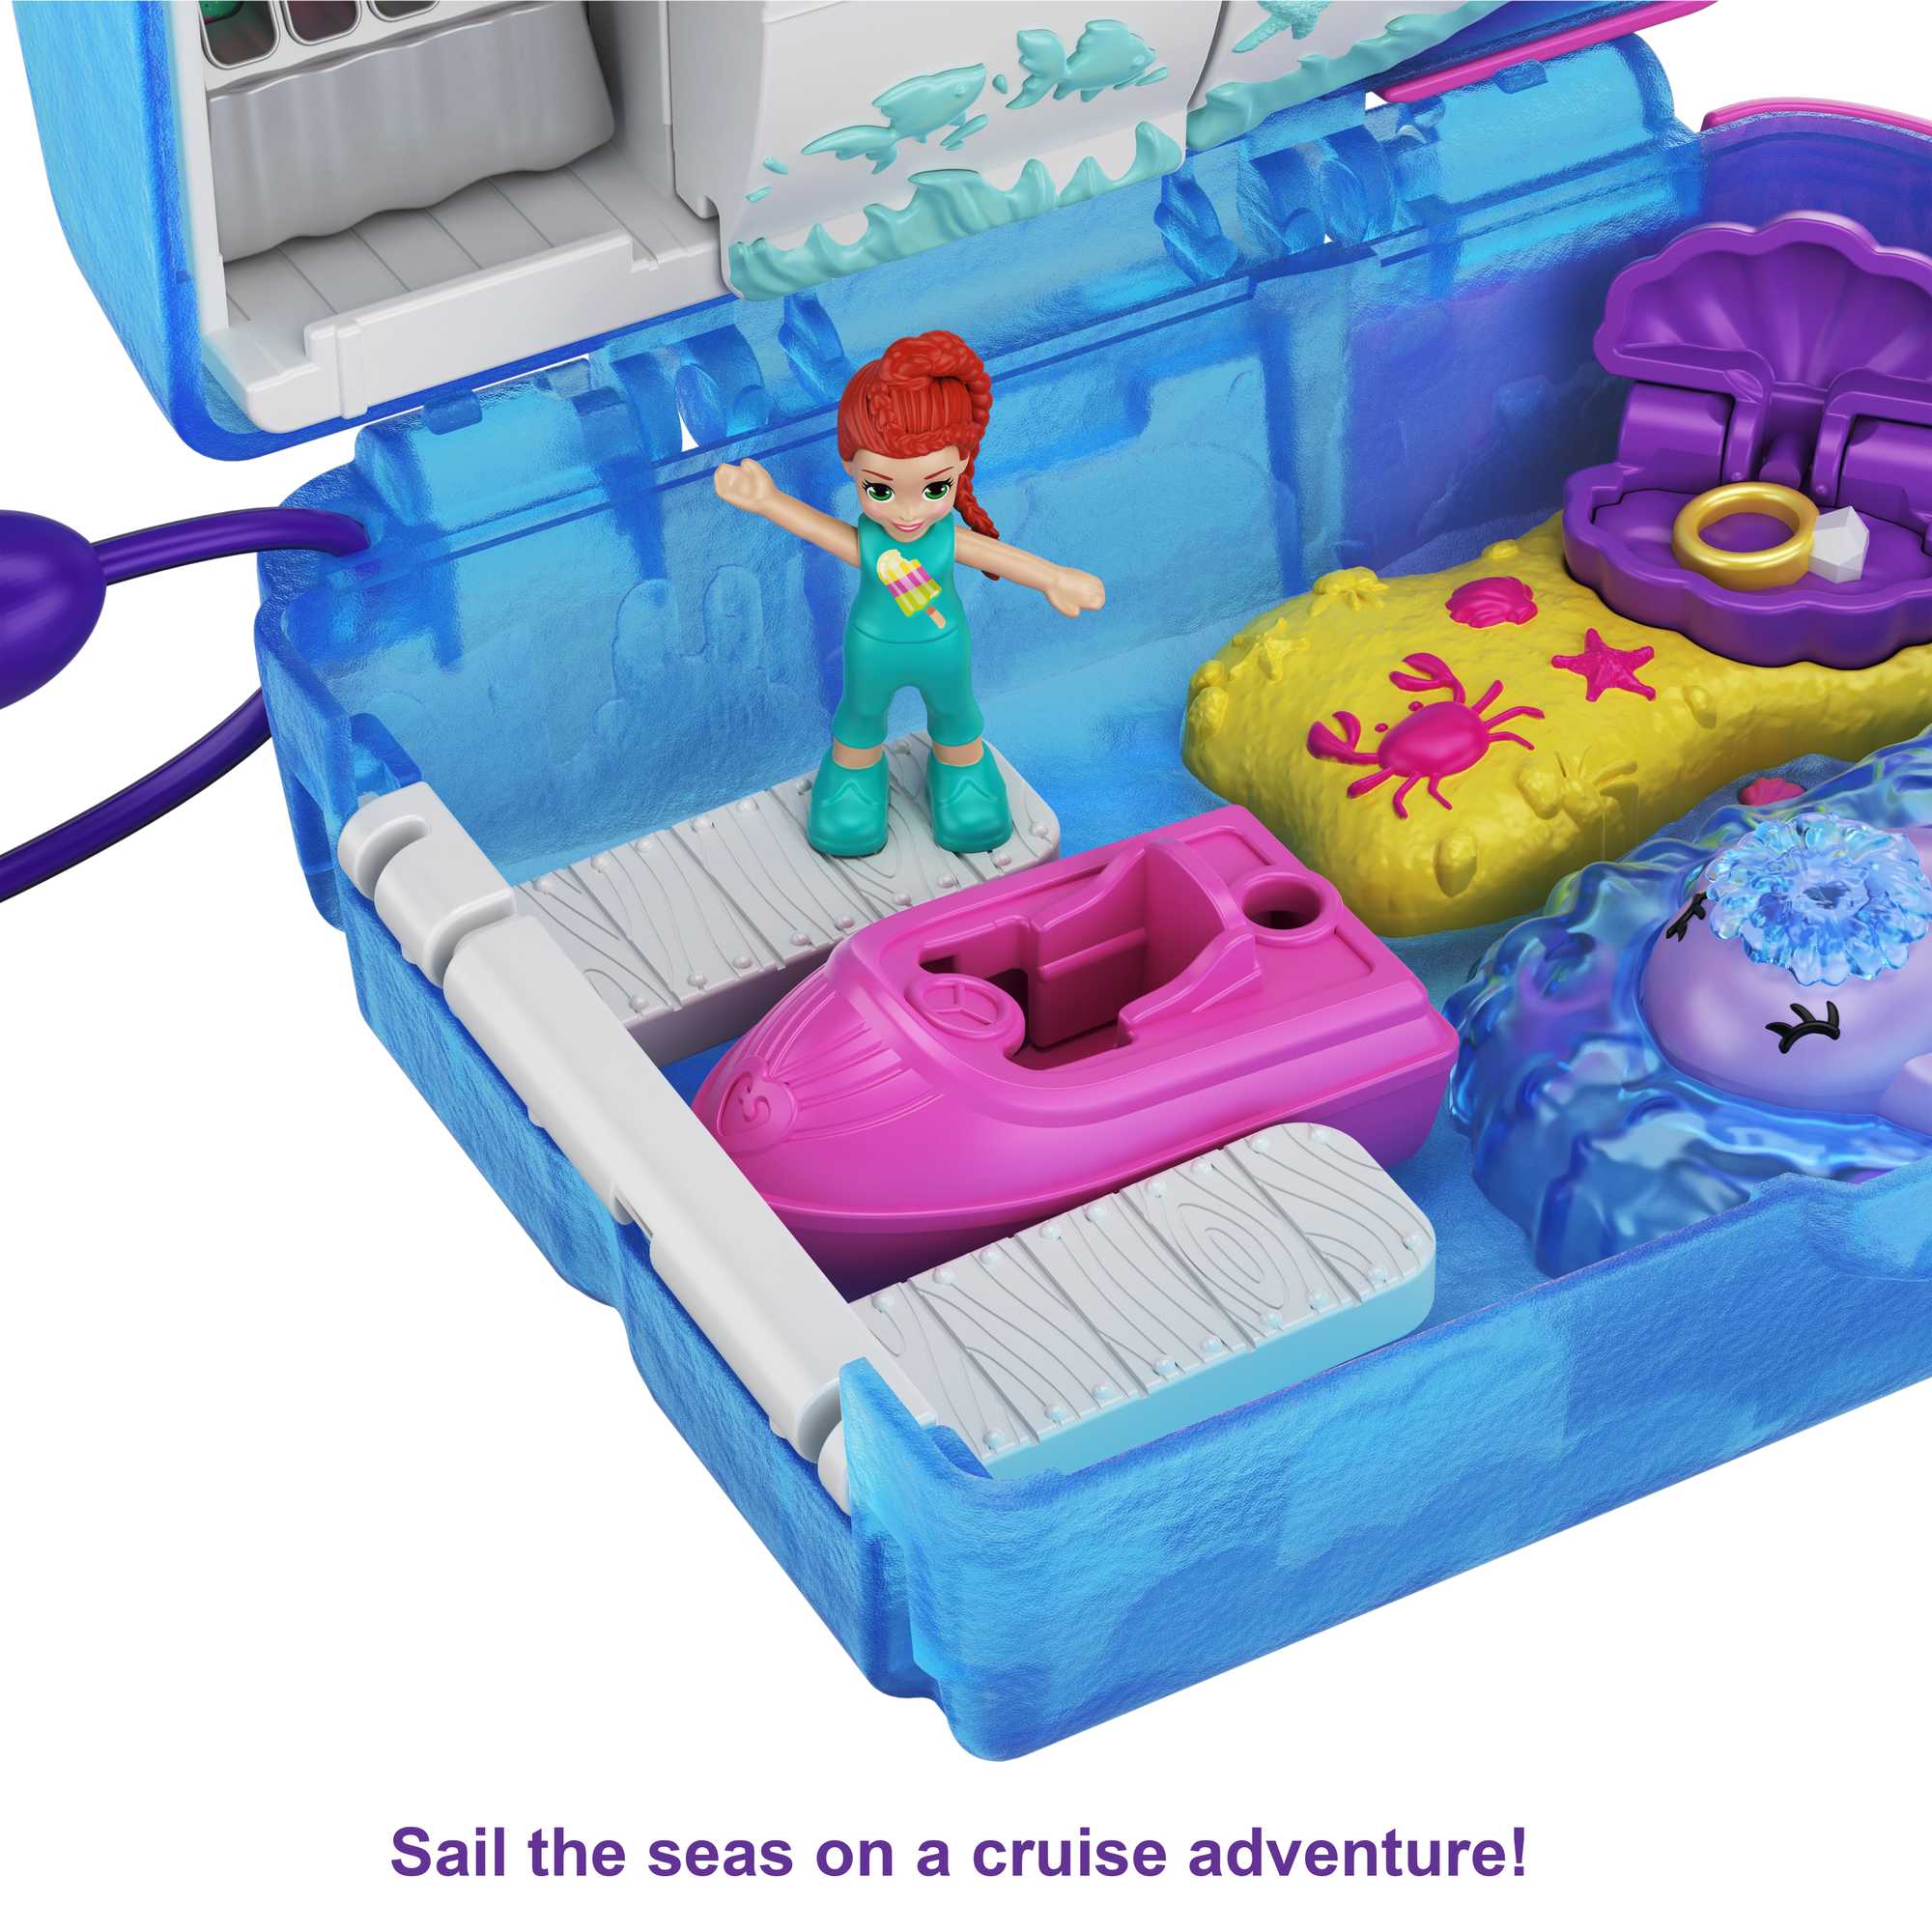 Polly Pocket Pocket World Sweet Sails Cruise Ship Compact Playset with 2 Micro Dolls & Accessories - image 5 of 7